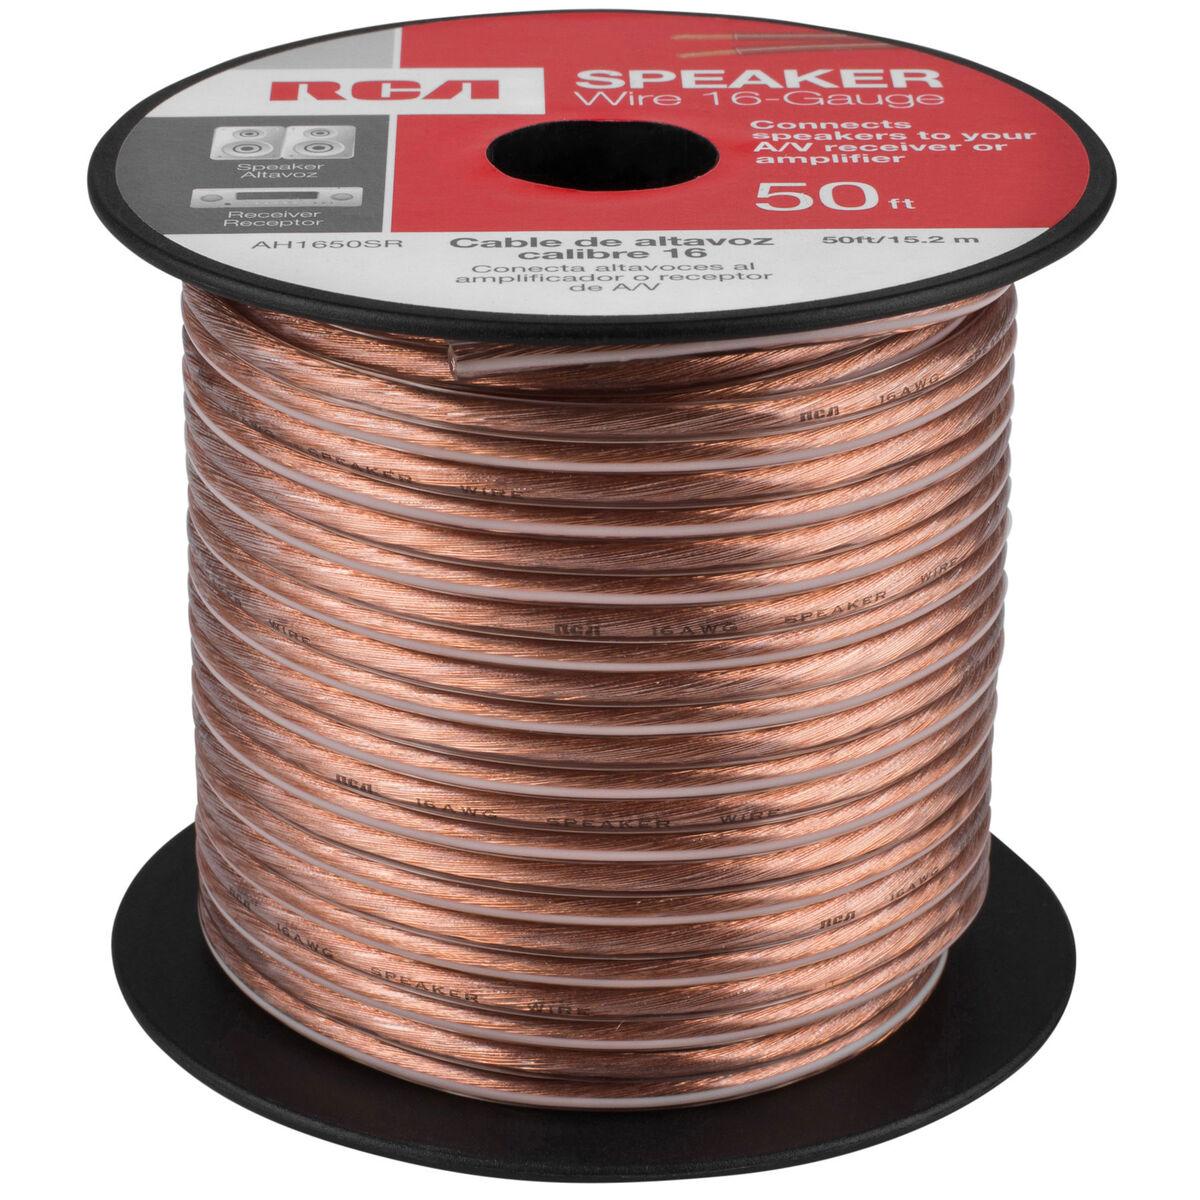 Photos - Cable (video, audio, USB) RCA AH1650SR 16 AWG Speaker Wire Spool 50 ft. 